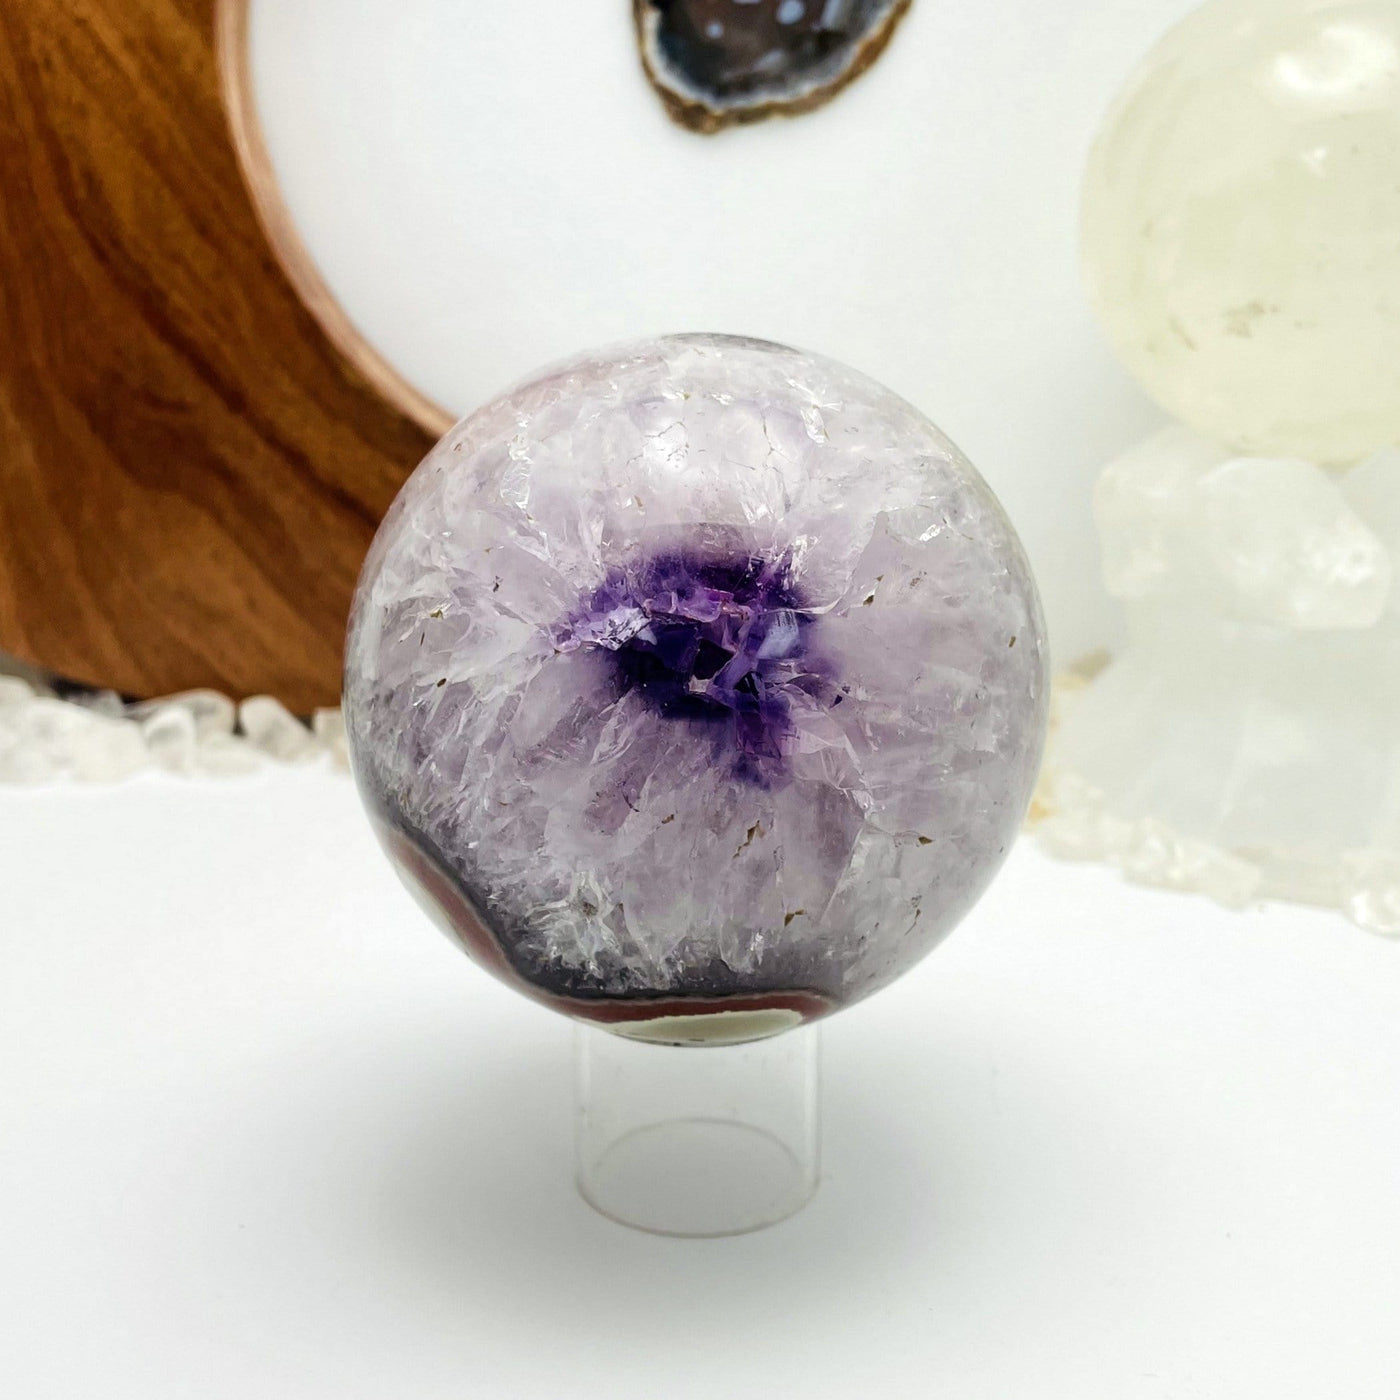 another Front shot picture of the agate amethyst druzy sphere.